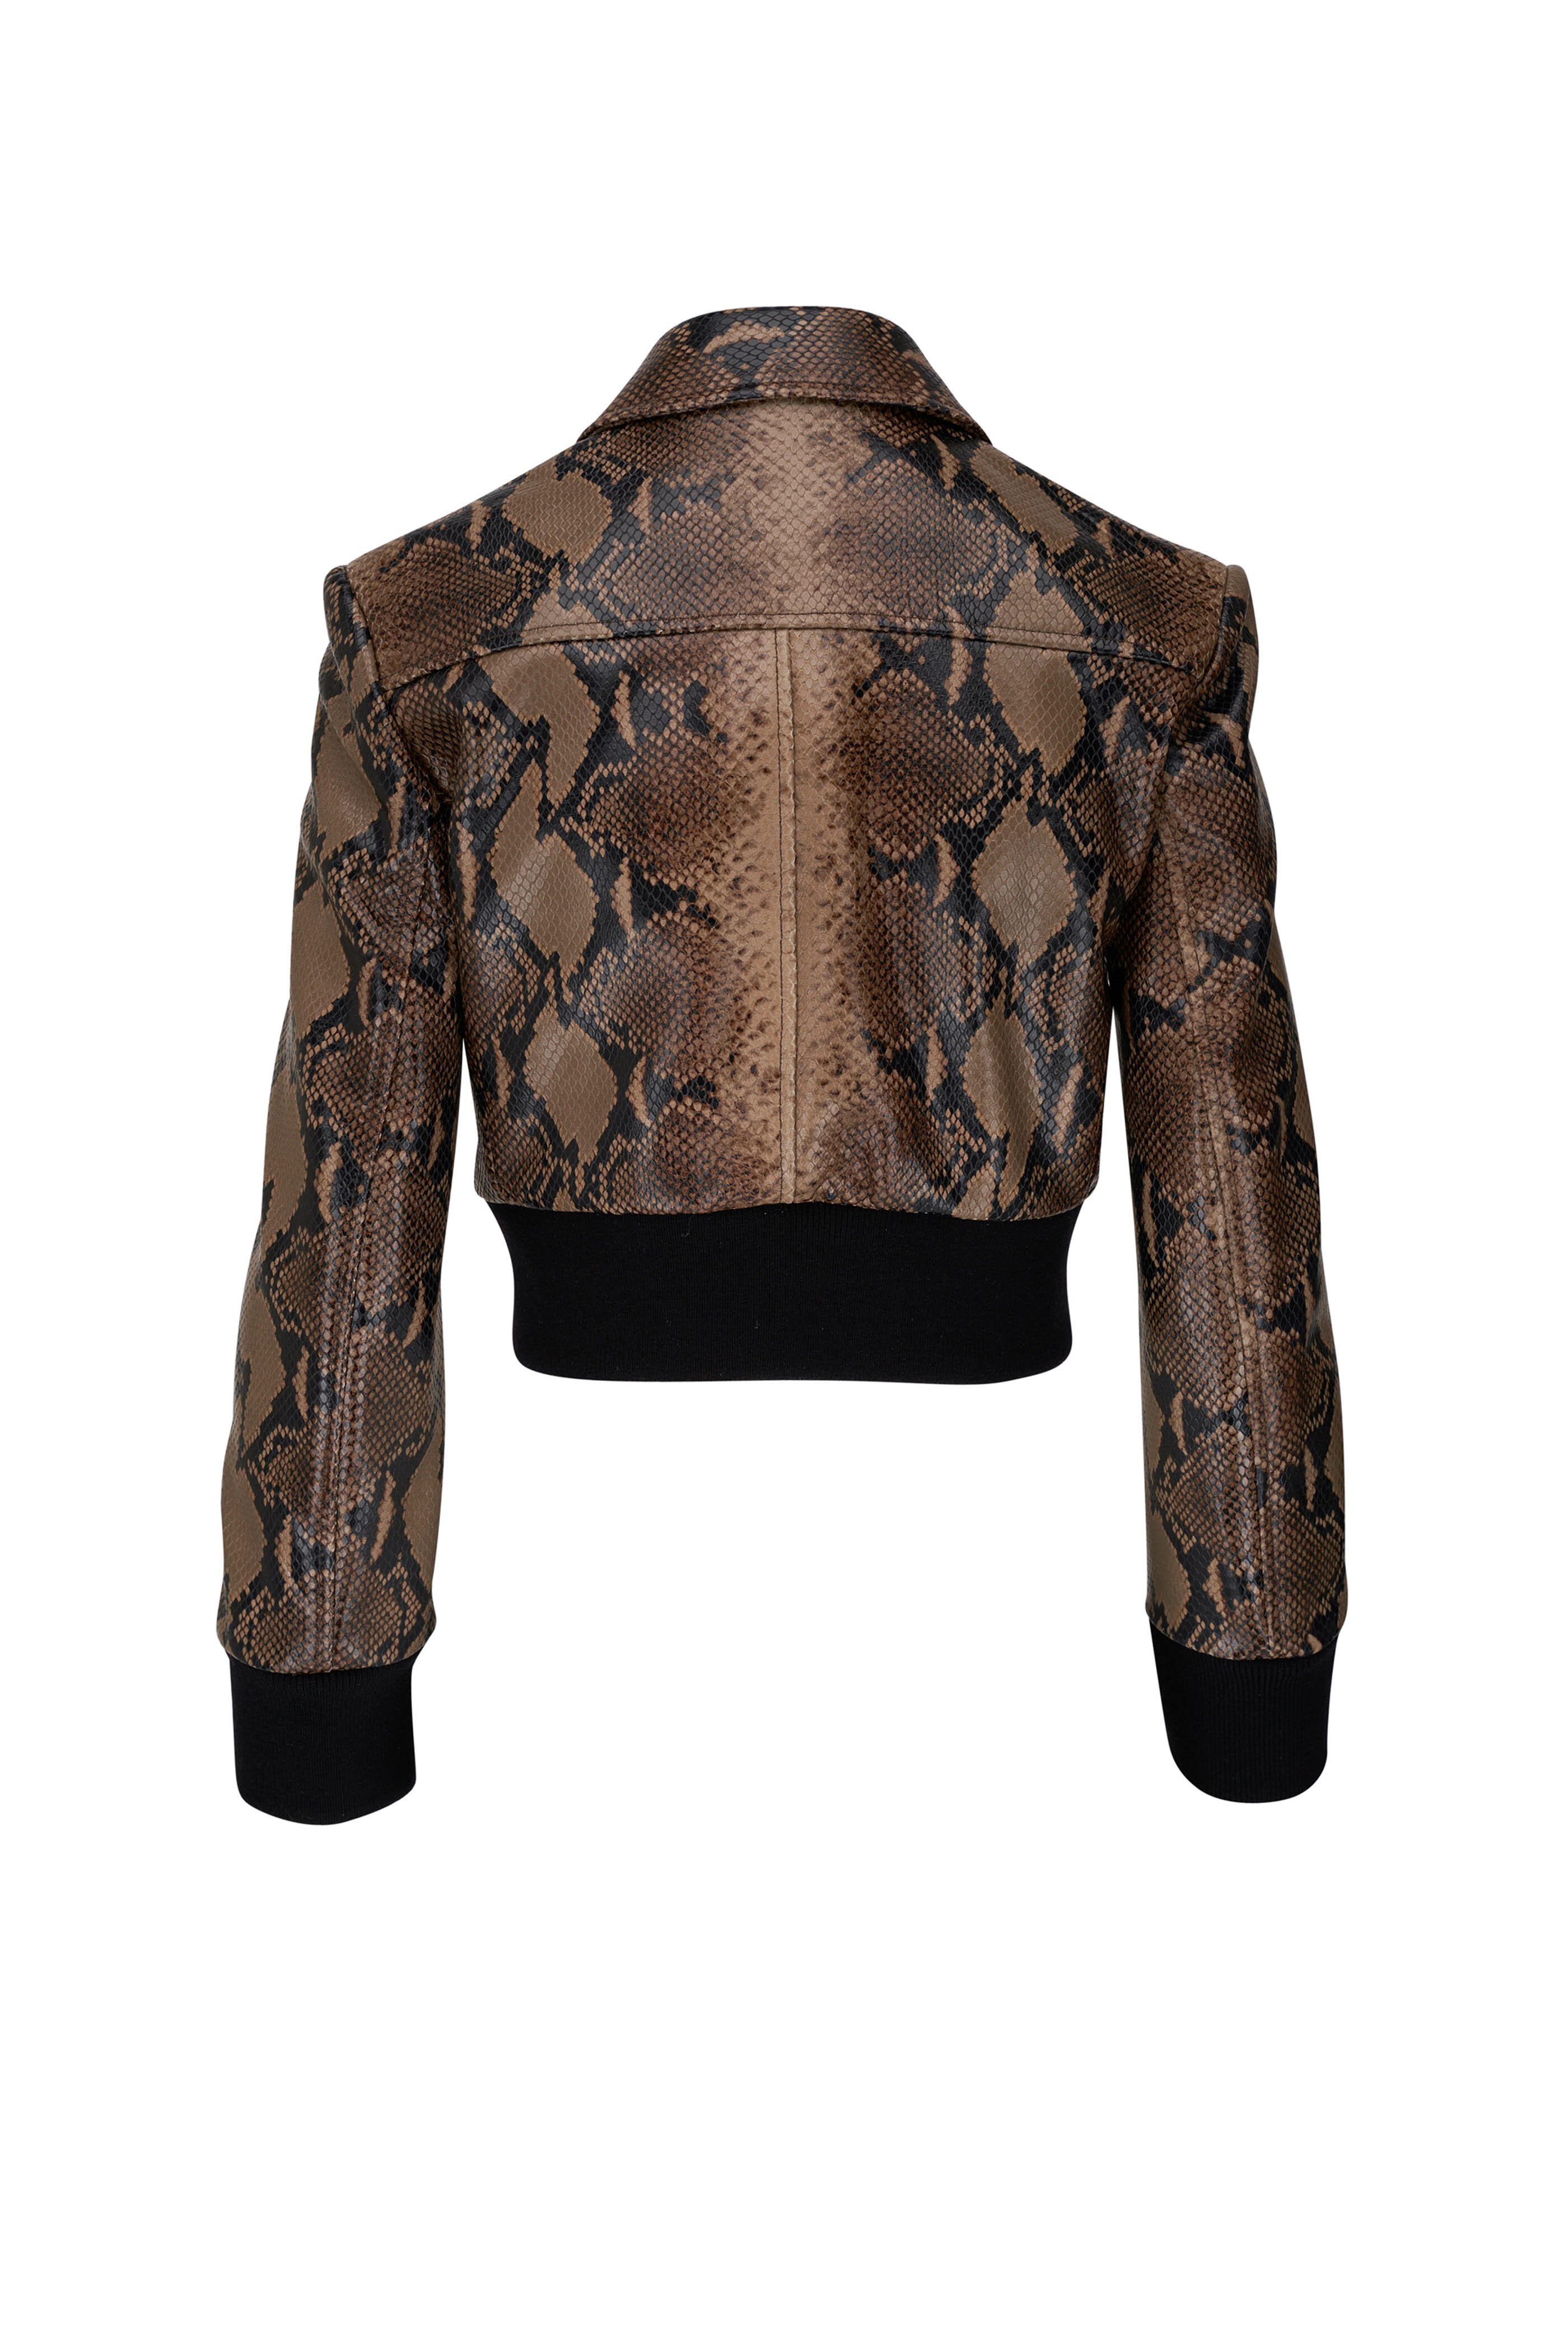 Khaite Women's Hector Brown Embossed Leather Jacket | L by Mitchell Stores